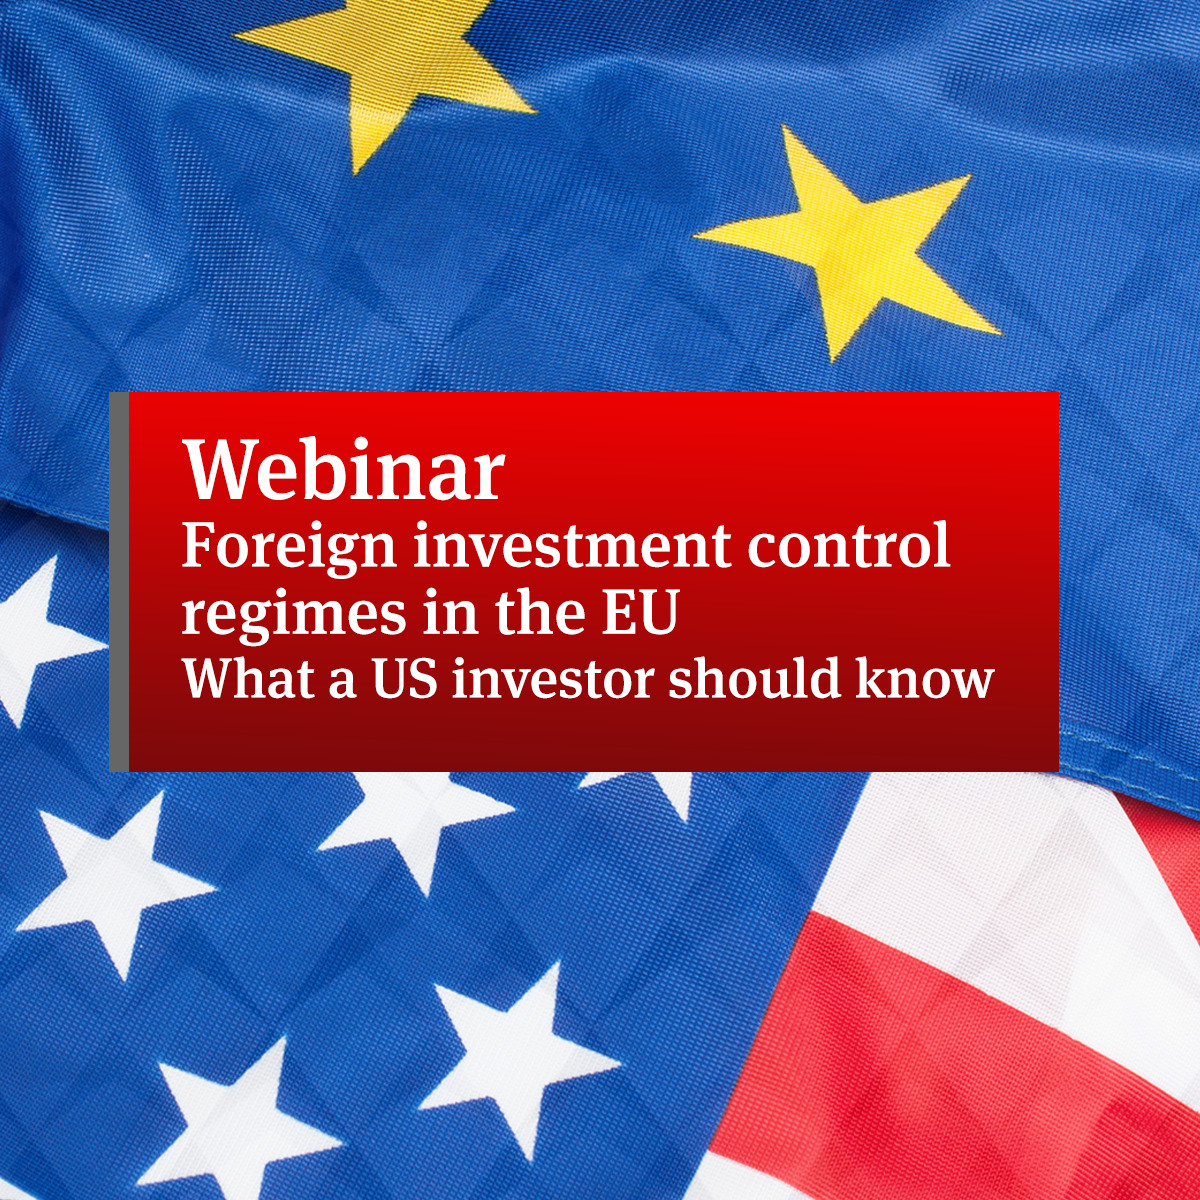 Foreign investment control regimes in the EU what a US